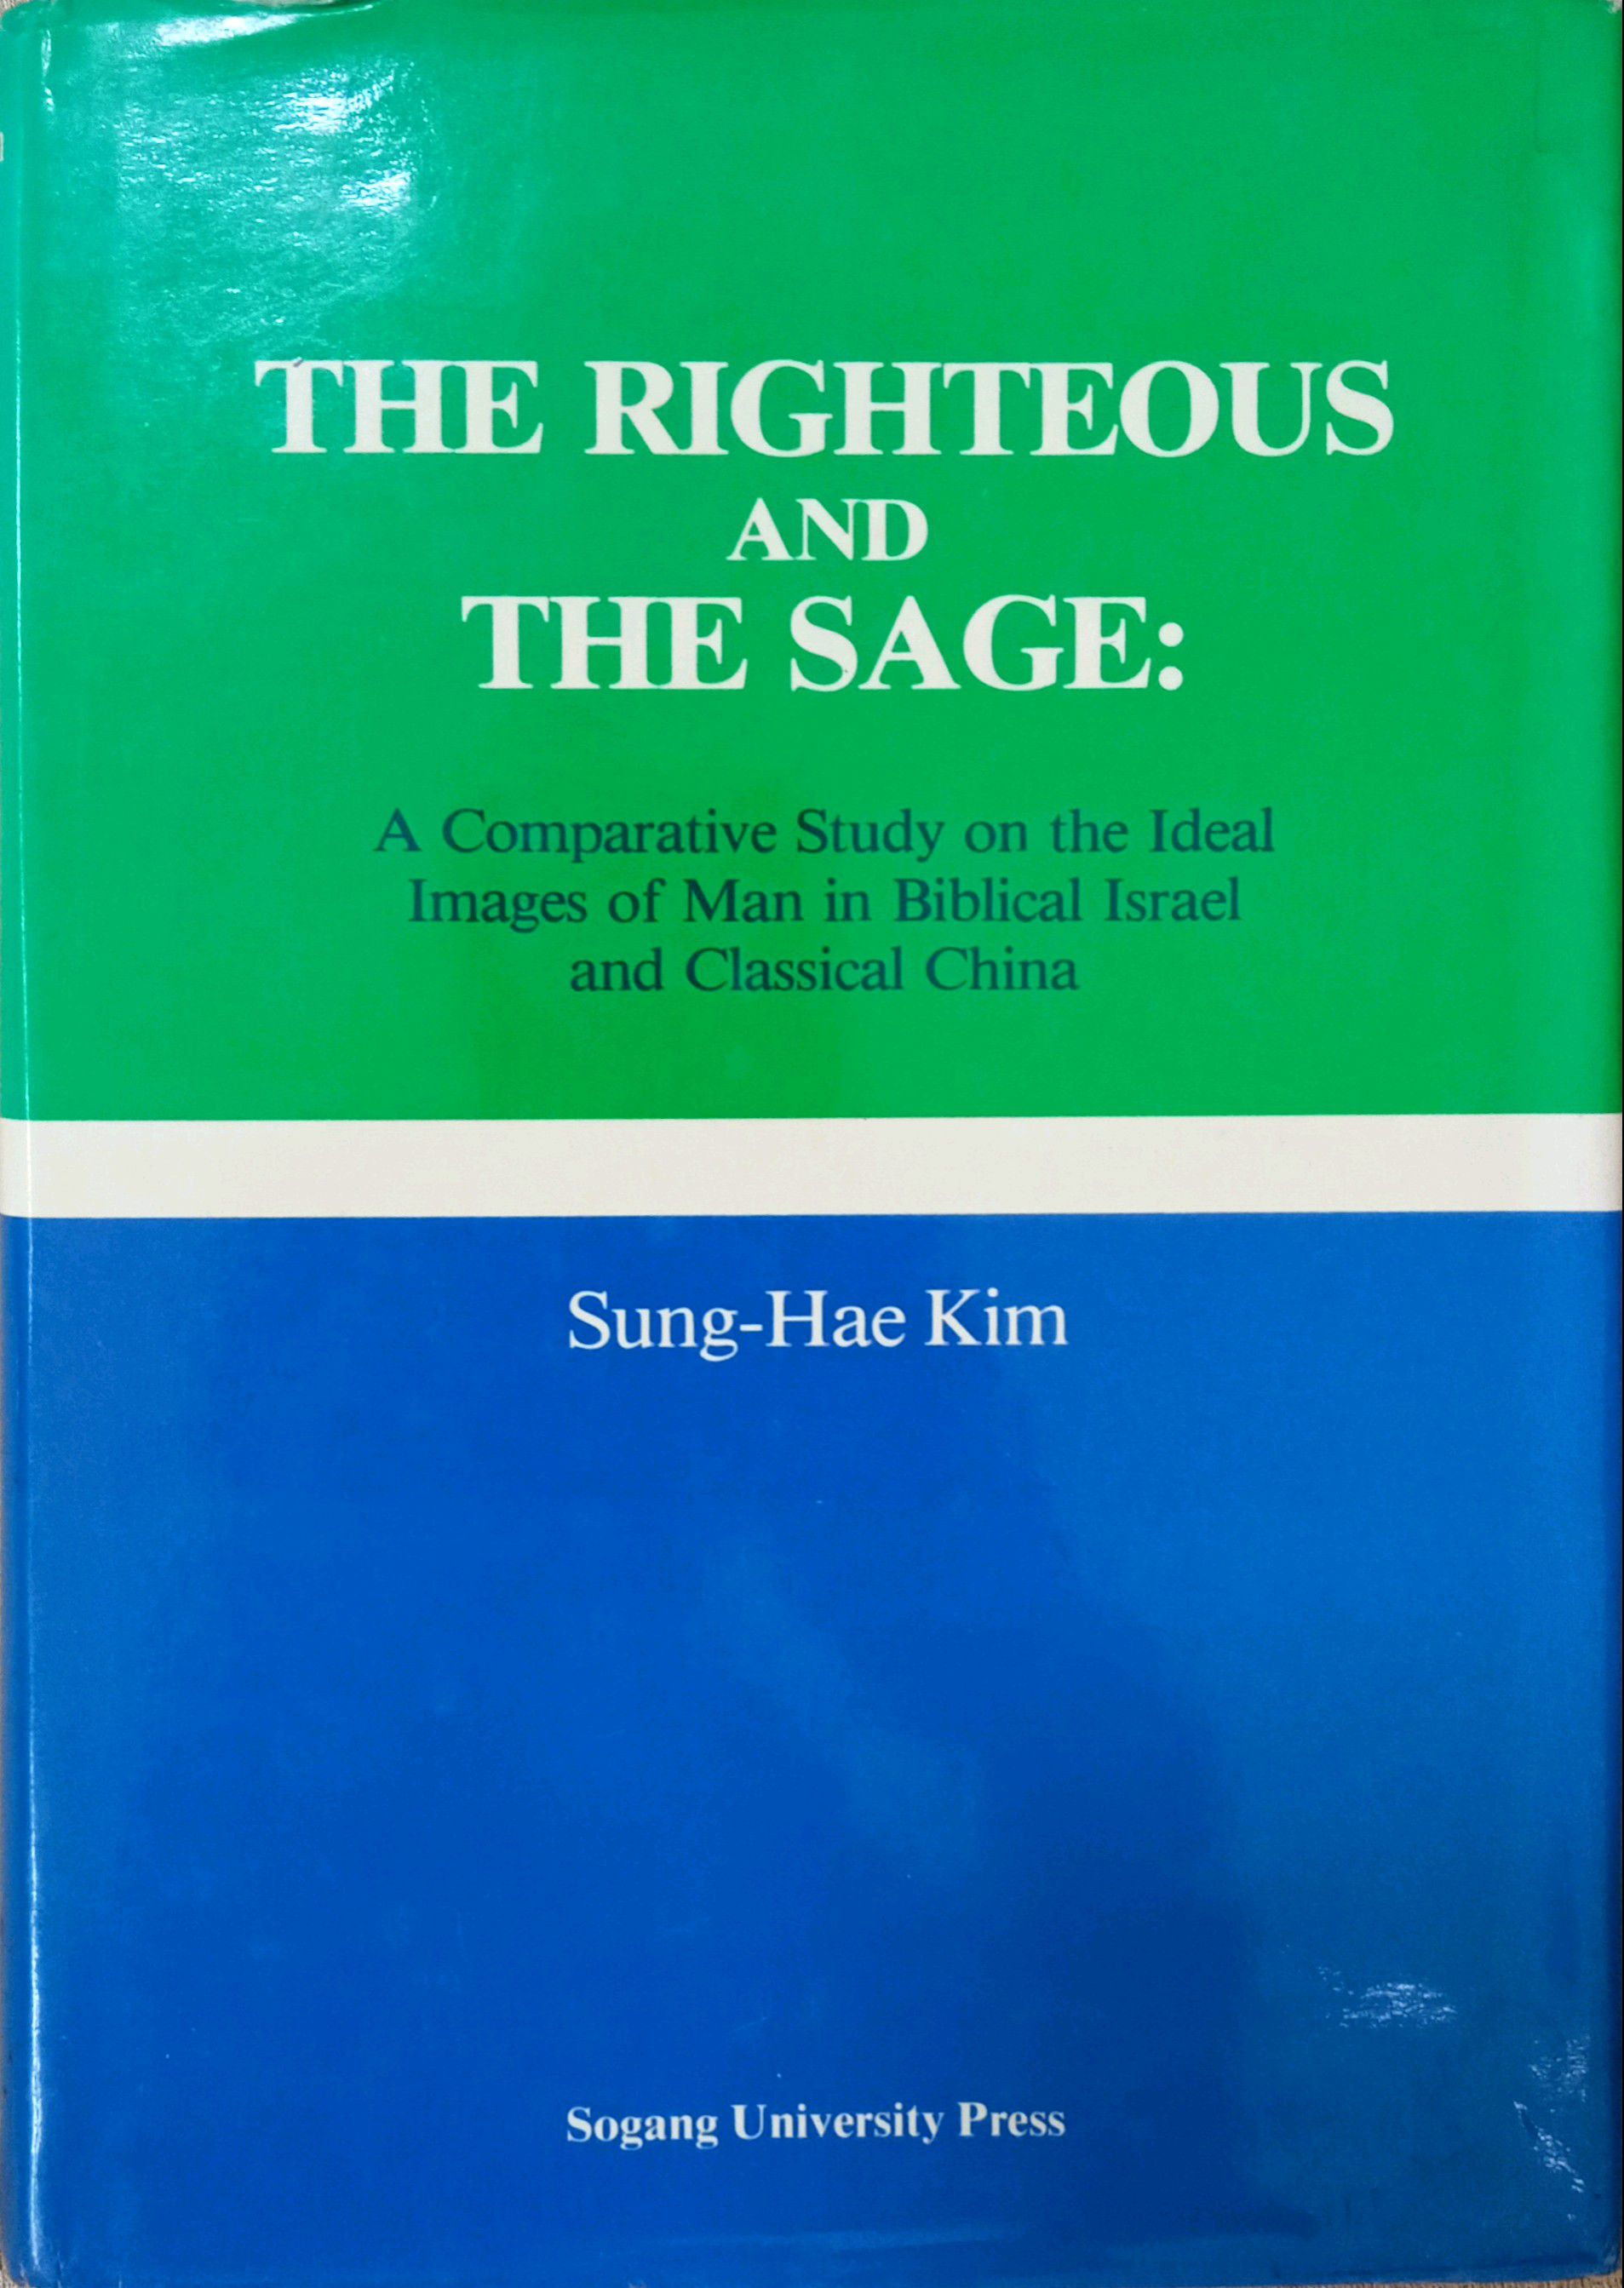 THE RIGHTEOUS AND THE SAGE